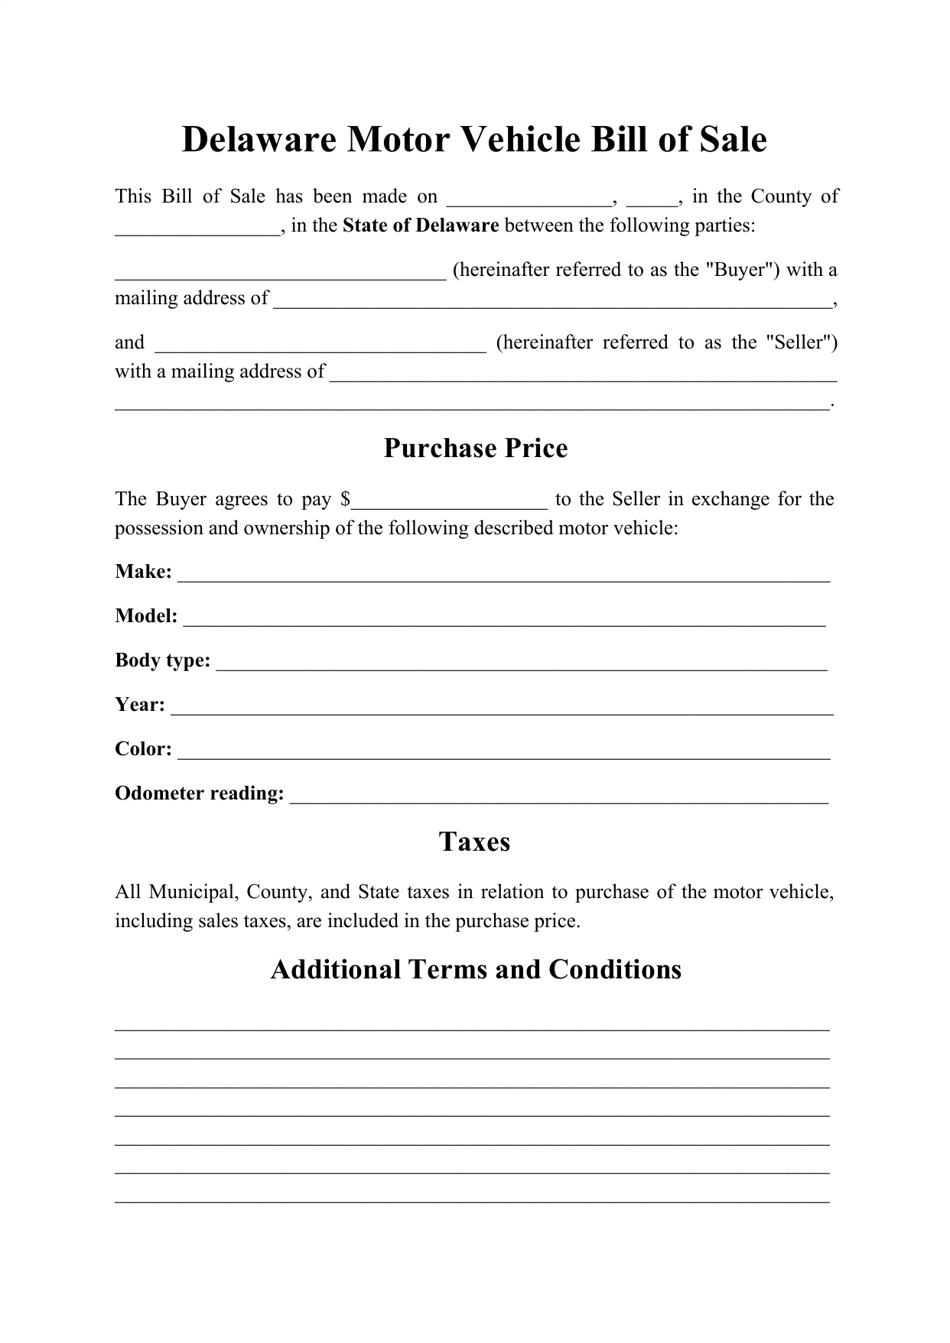 delaware-motor-vehicle-bill-of-sale-form-fill-out-sign-online-and